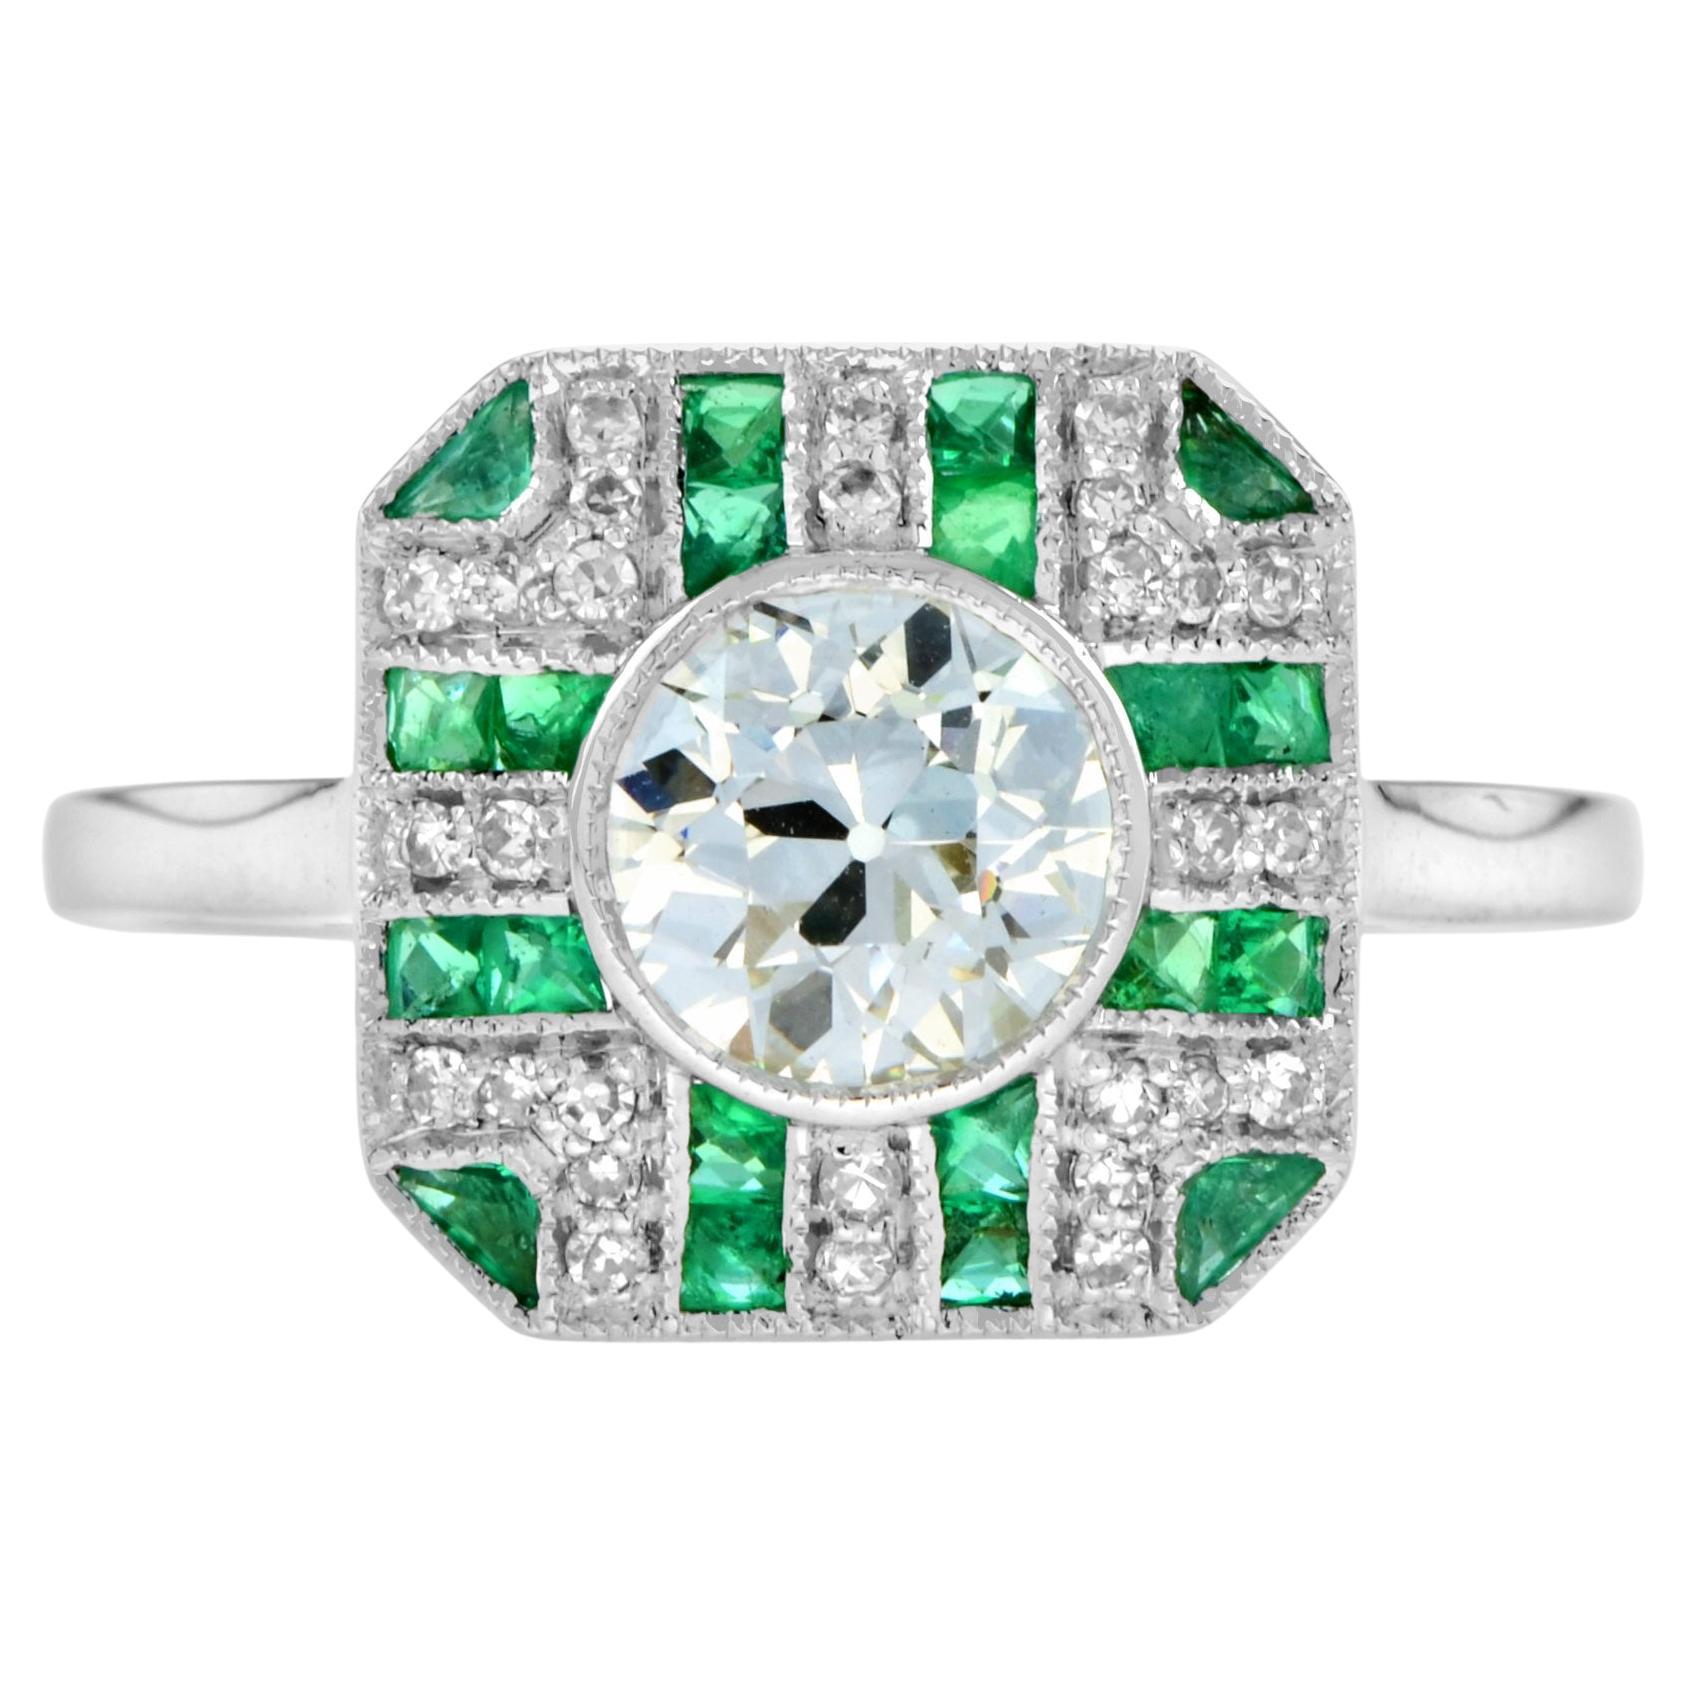 GIA Diamond with Emerald Art Deco Style Engagement Ring in 18k White Gold